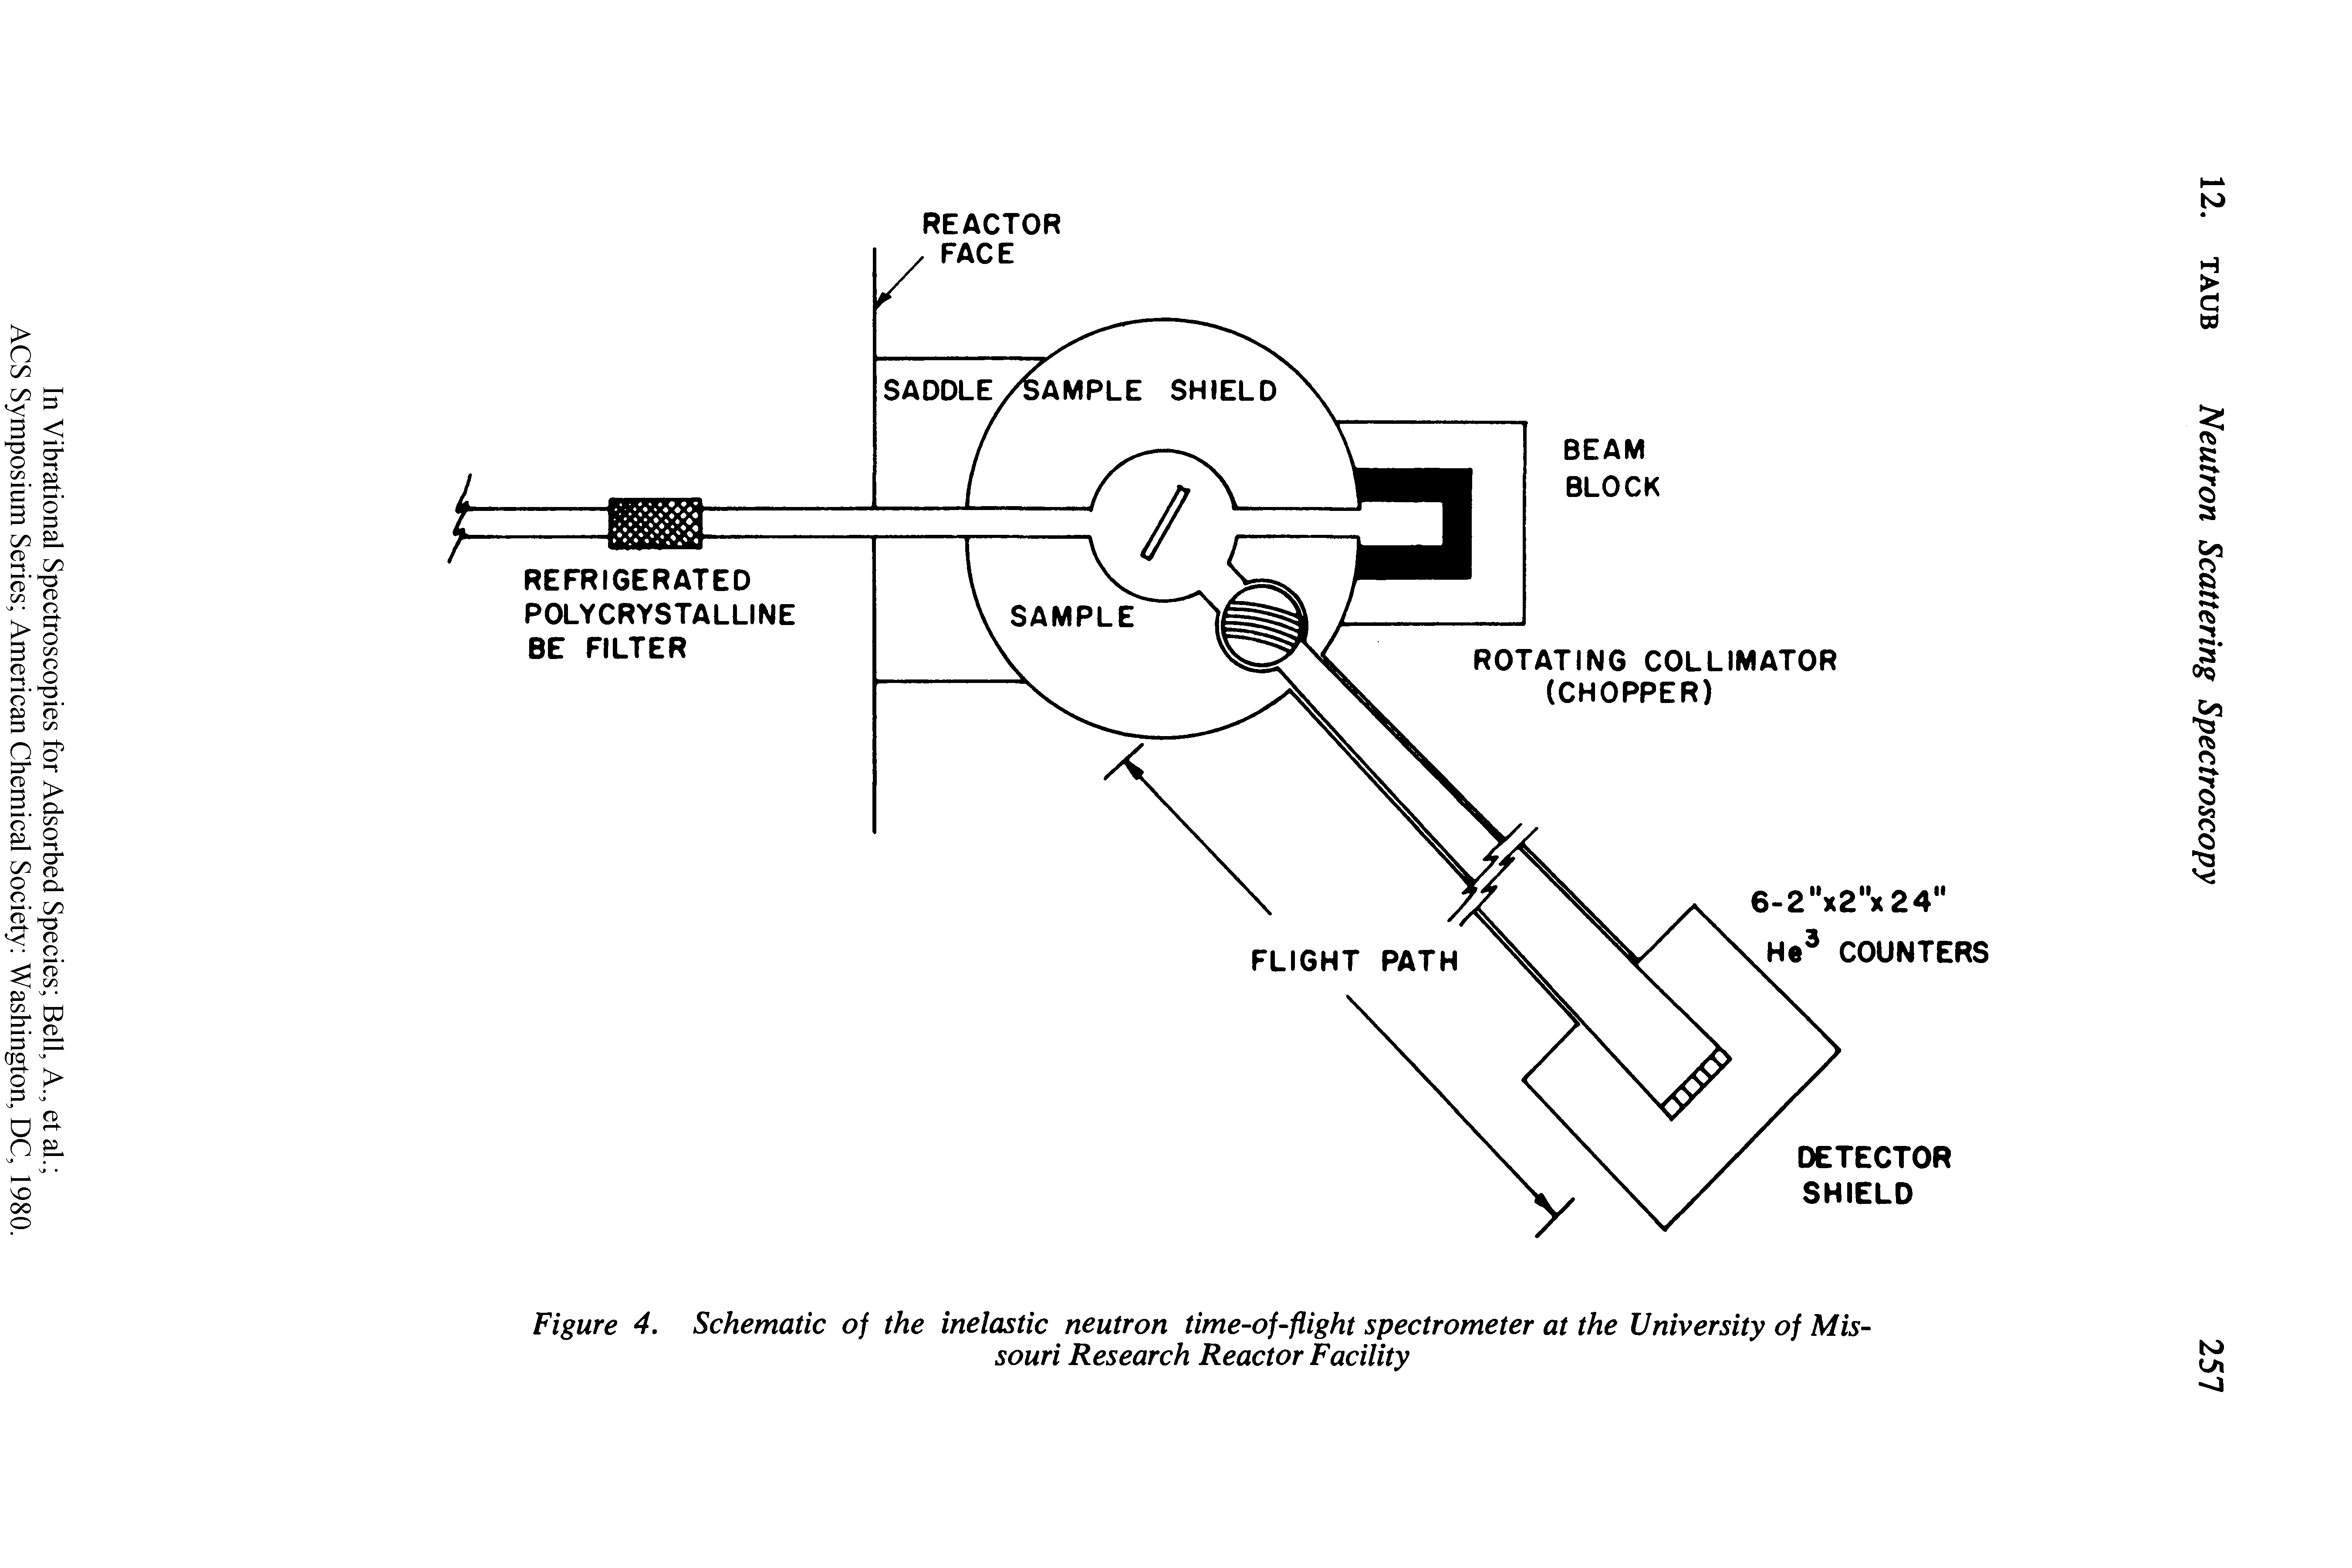 Figure 4. Schematic of the inelastic neutron time-of-flight spectrometer at the University of Missouri Research Reactor Facility...